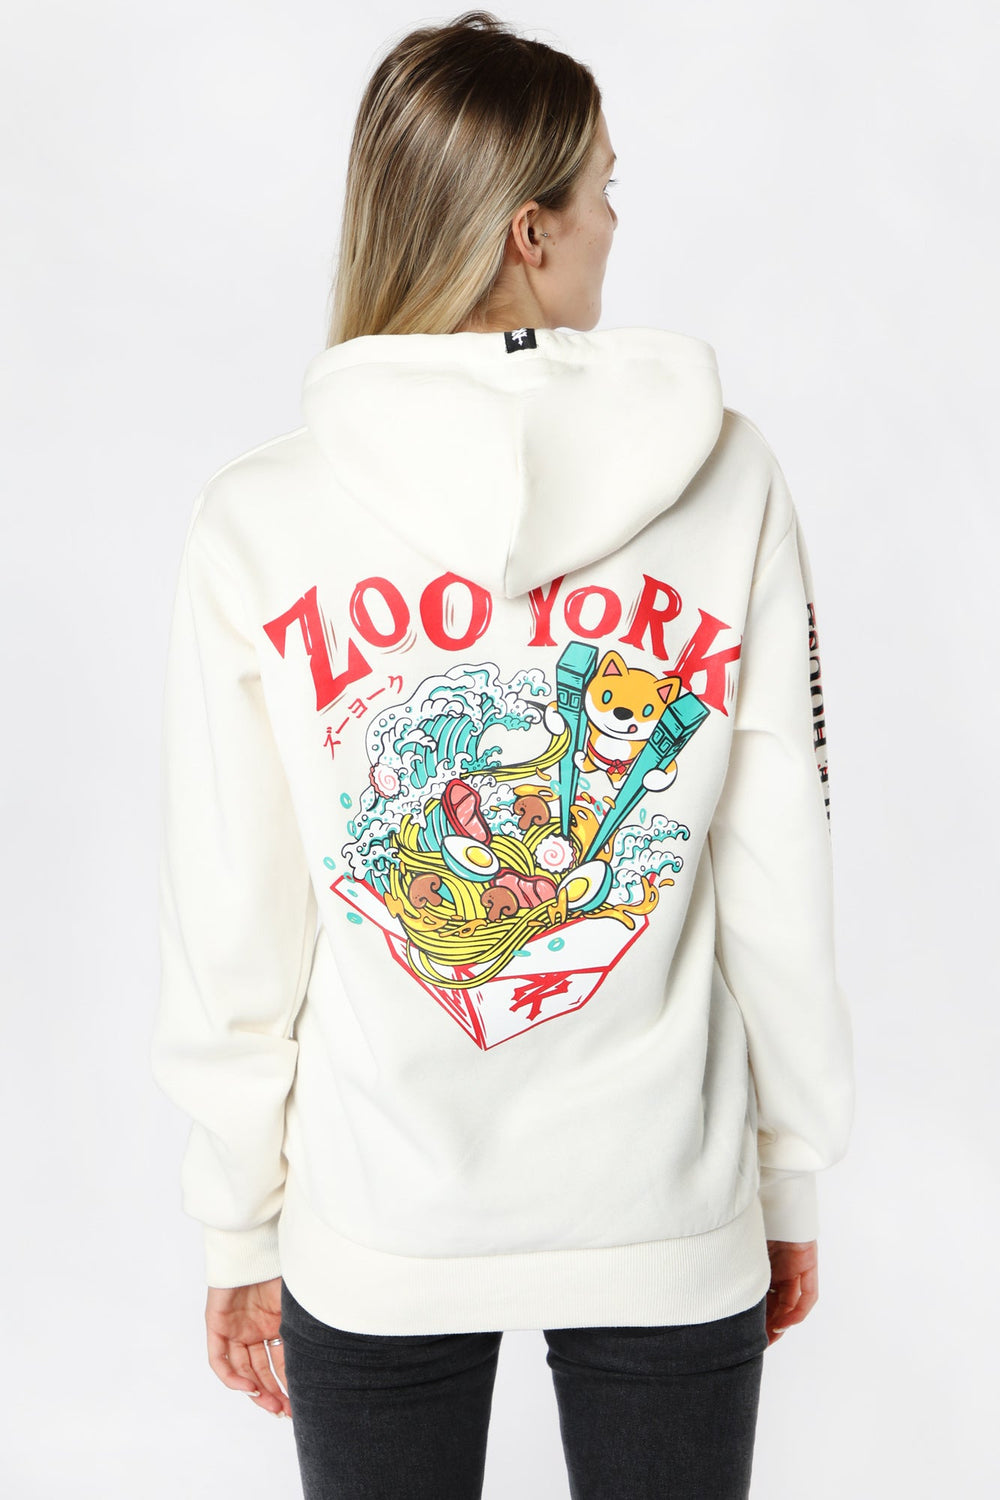 Zoo York Unisex Takeout Noodles Hoodie Zoo York Unisex Takeout Noodles Hoodie